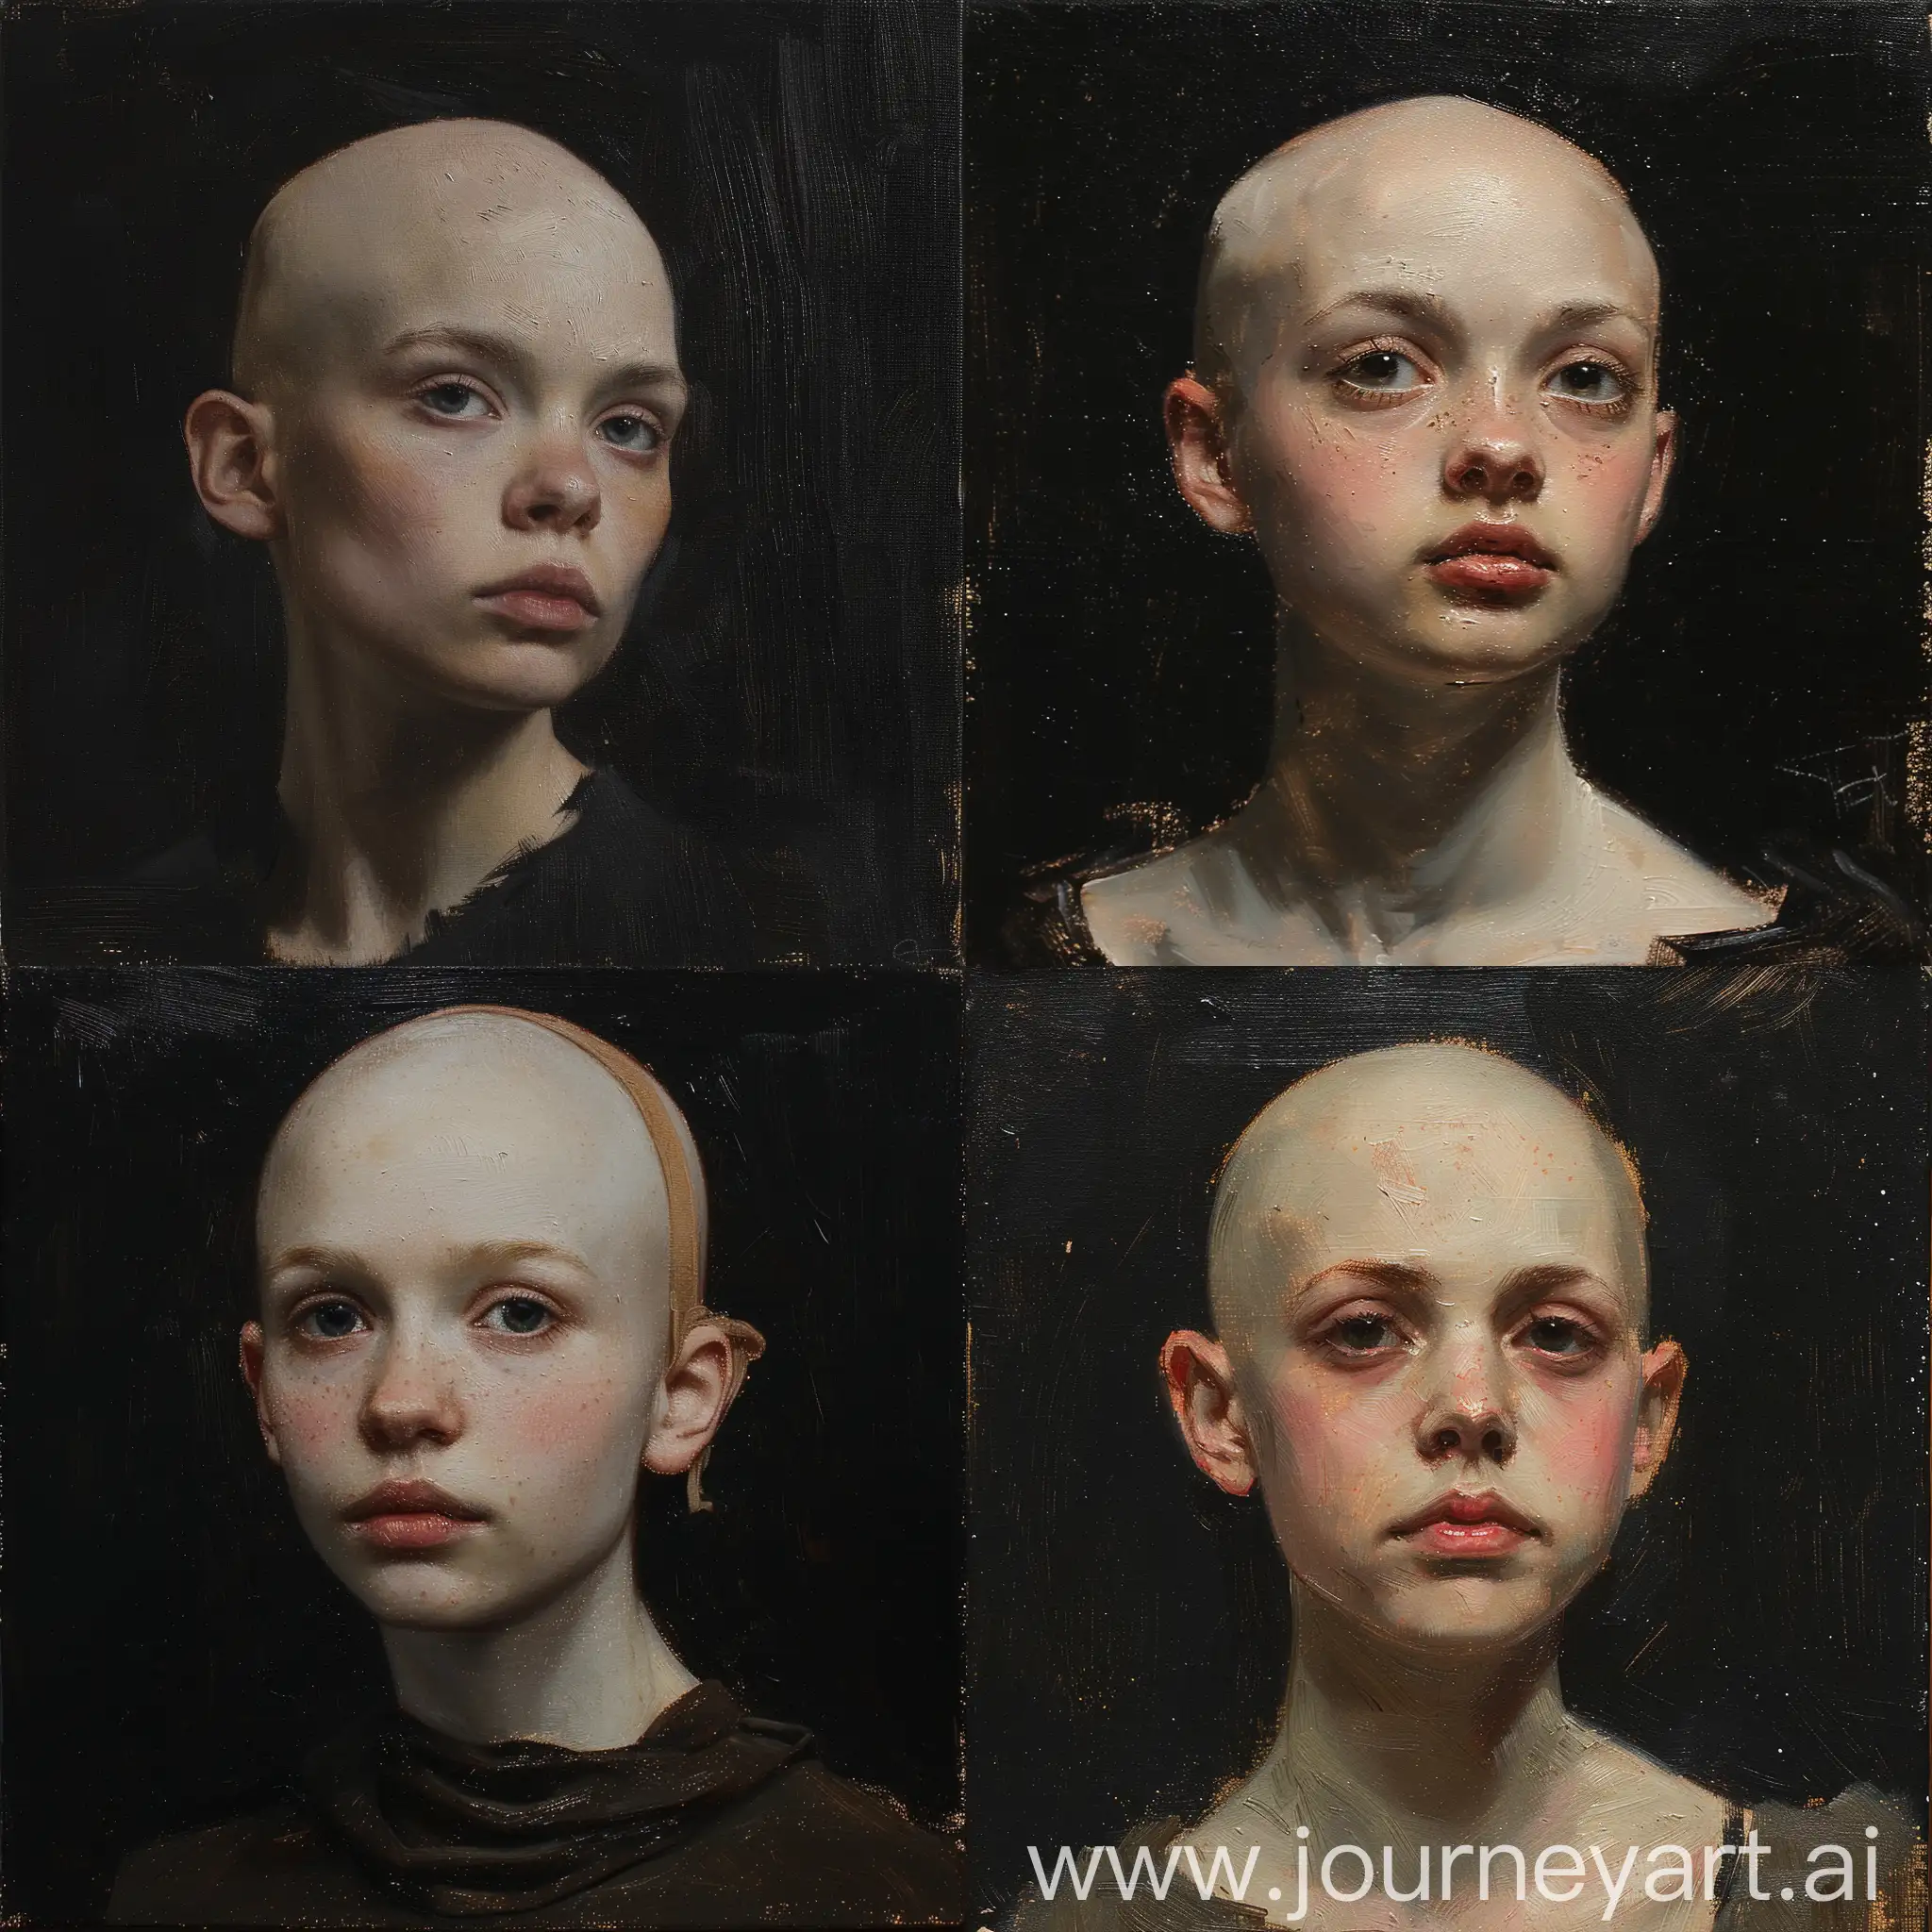 Oil sketch of a bald young woman , wlop John singer Sargent, jeremy lipkin and rob rey, range murata jeremy lipking, John singer Sargent, black background, jeremy lipkin, lensculture portrait awards, casey baugh and james jean, detailed realism in painting, award-winning portrait, amazingly detailed oil painting